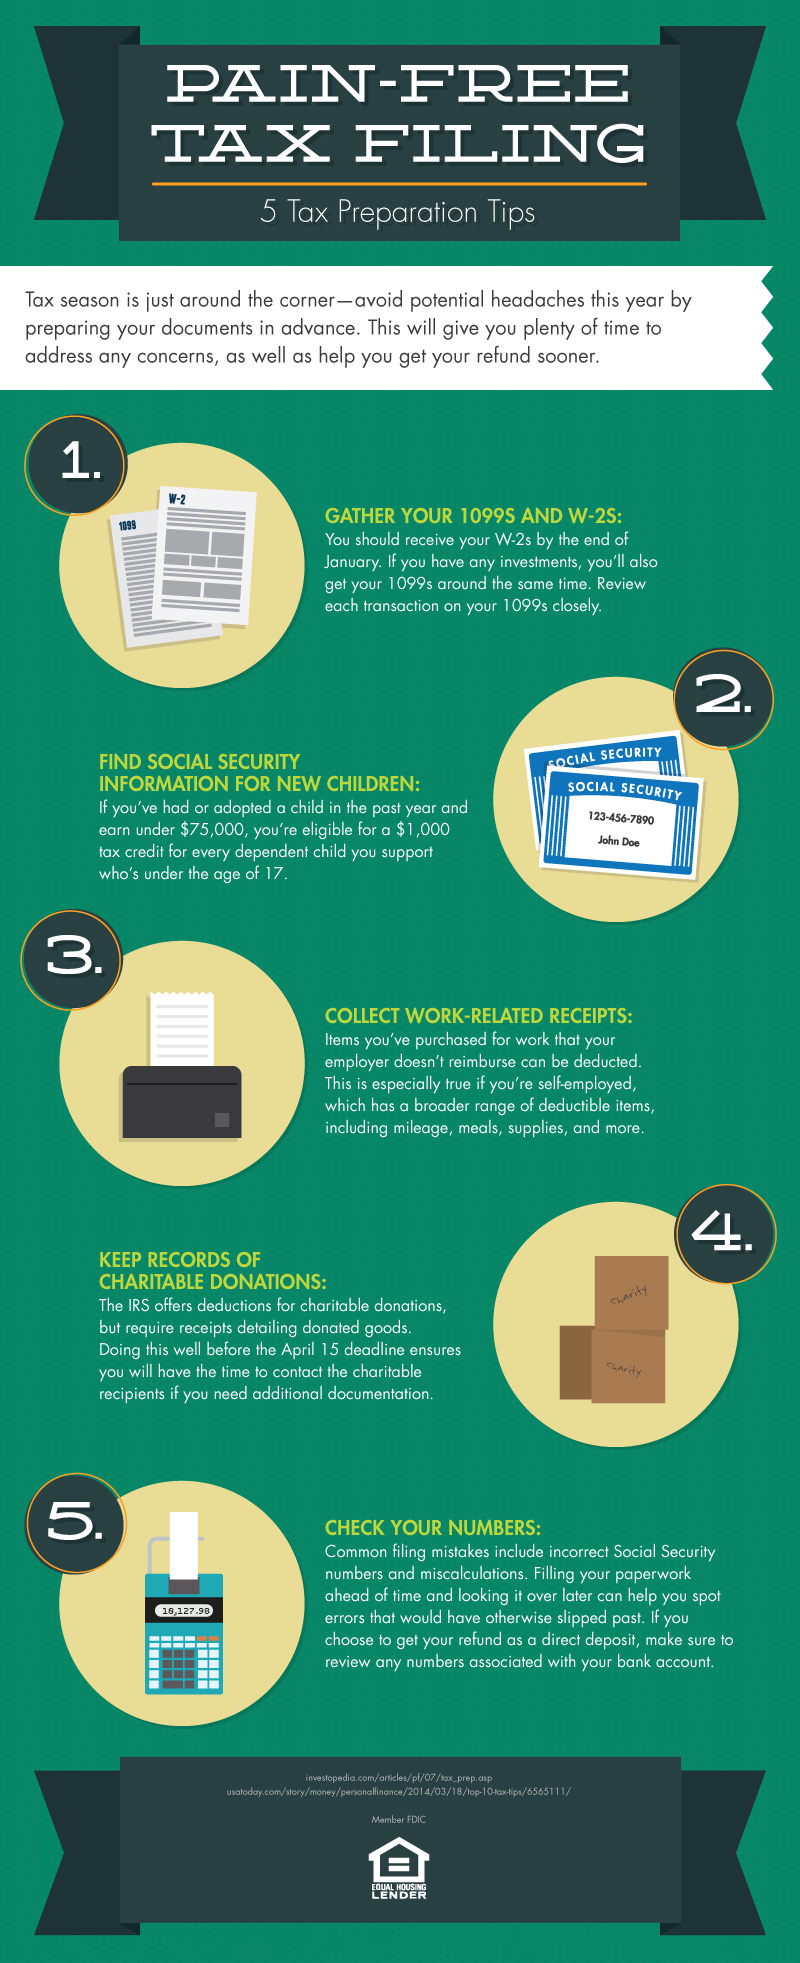 An infographic depicting five ways to improve your tax filing this year